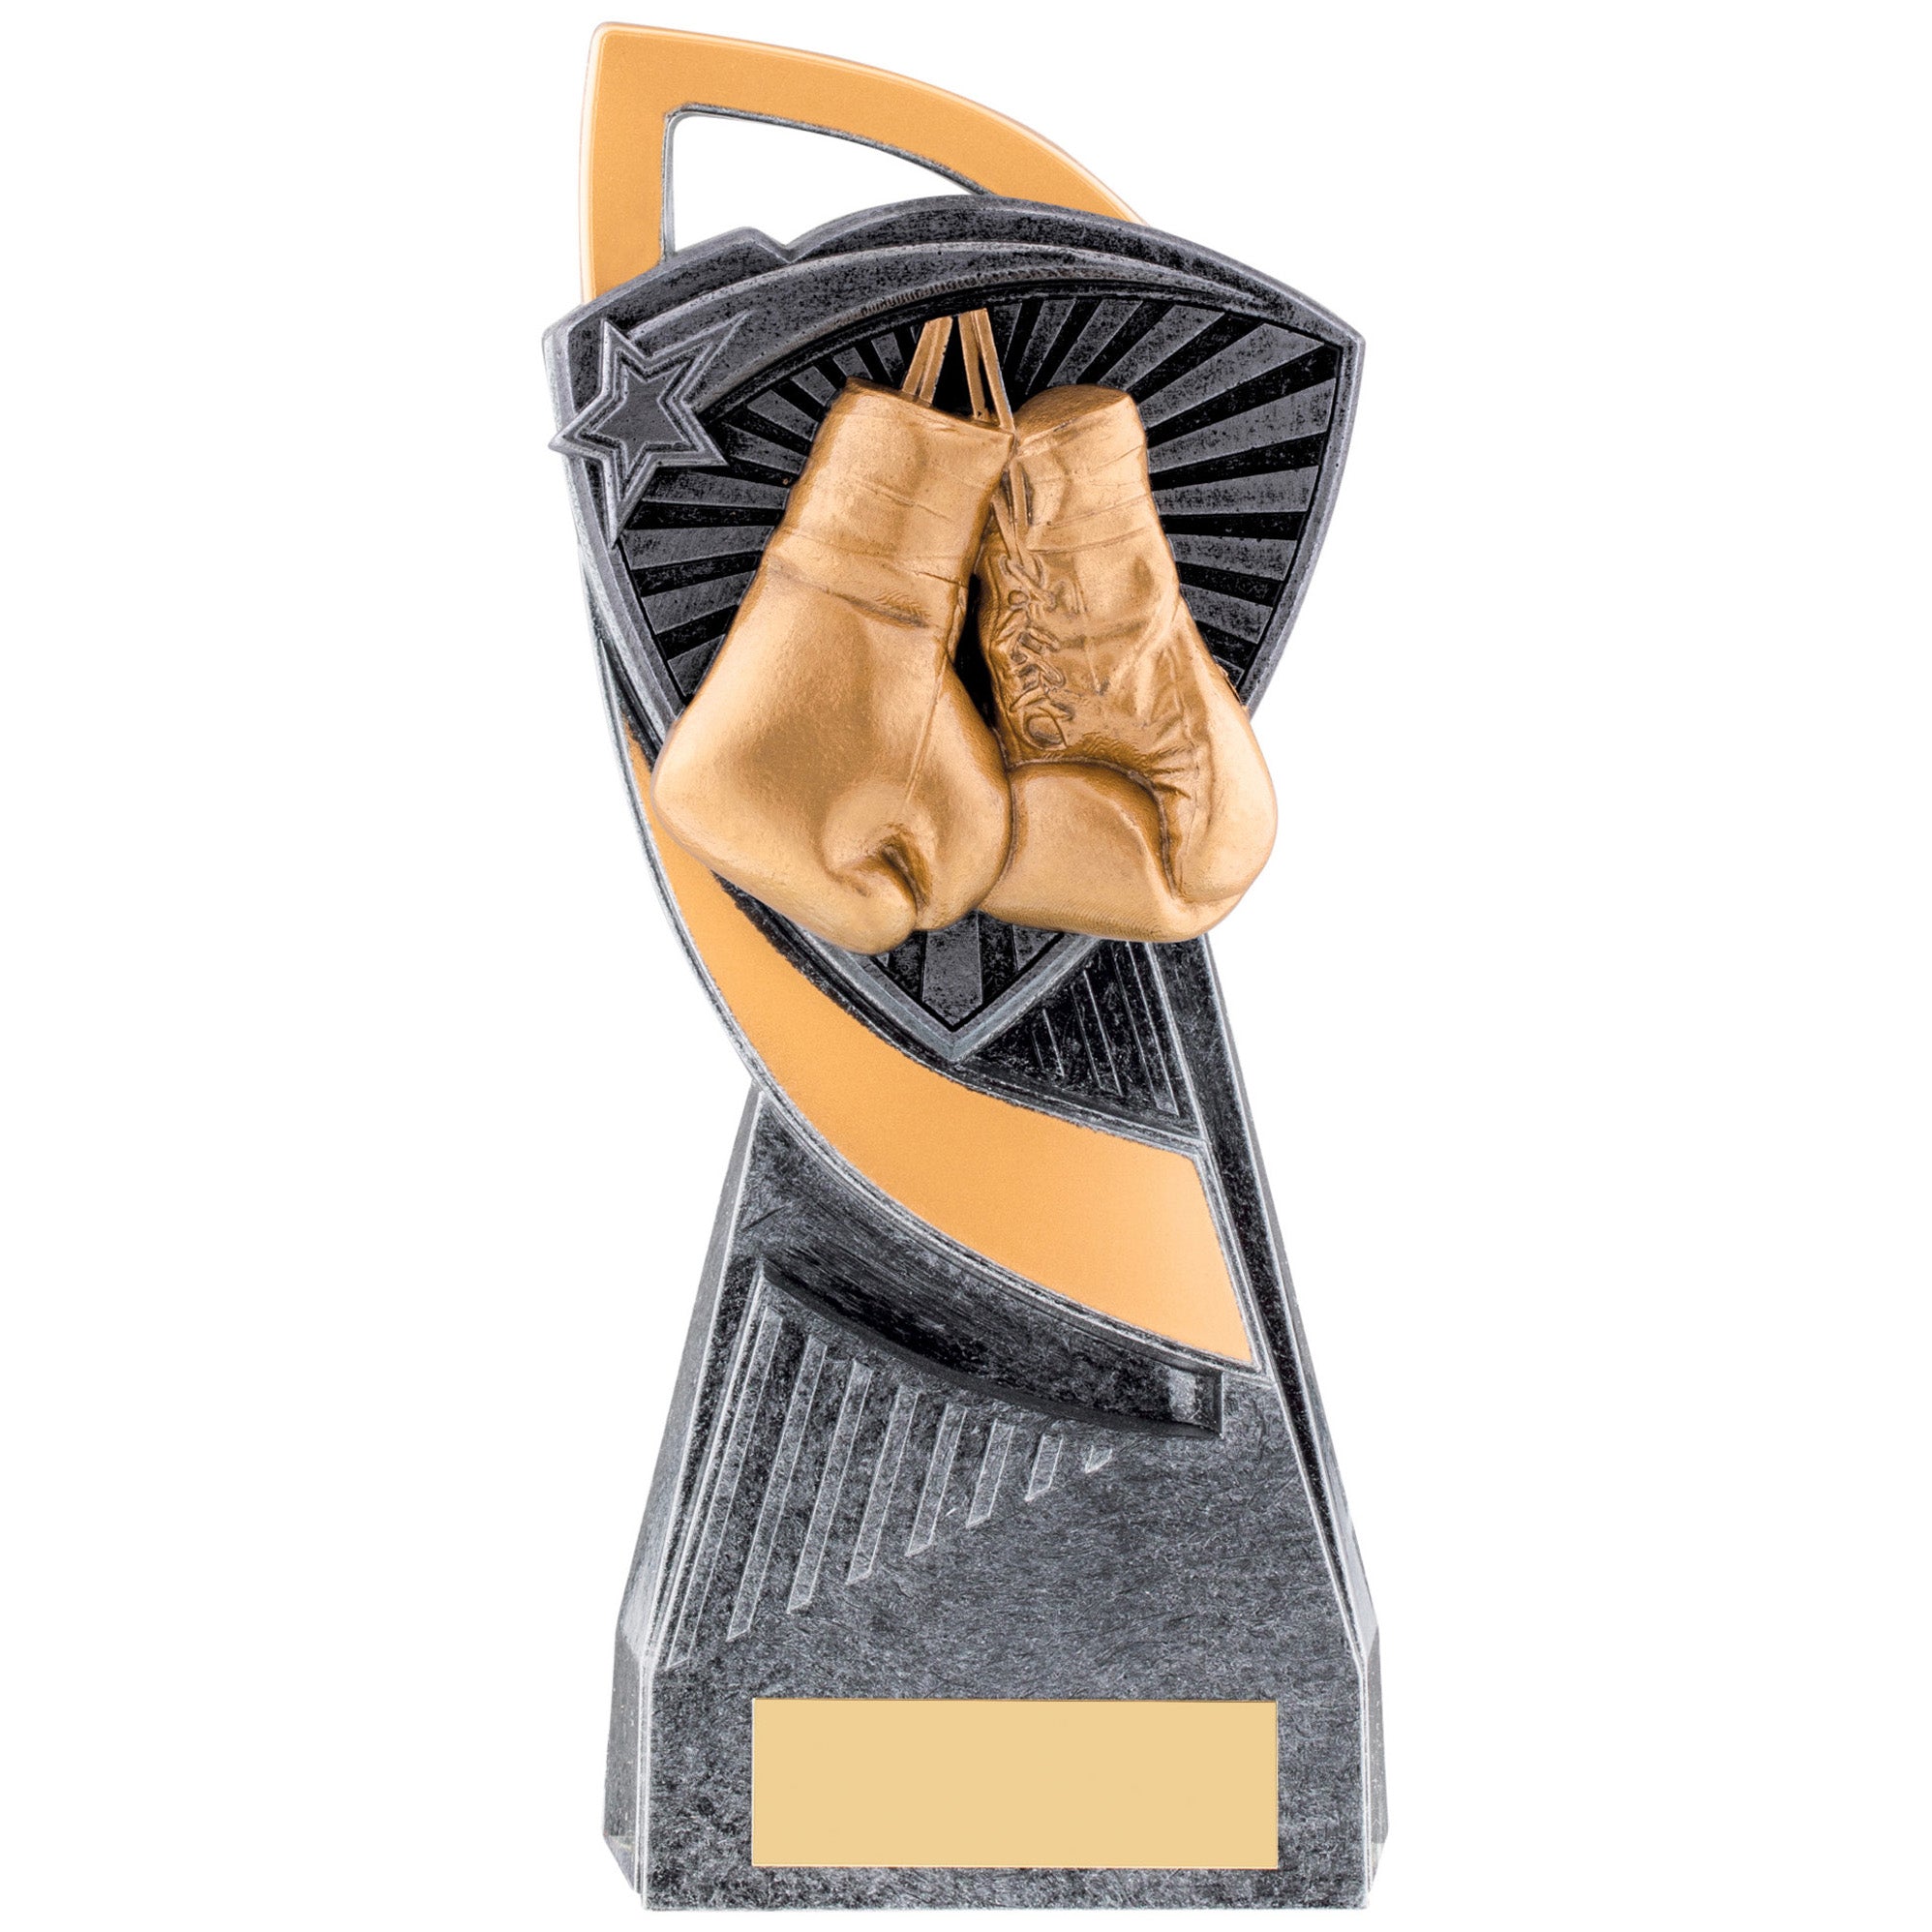 Utopia Boxing Trophy (Gold/Silver)